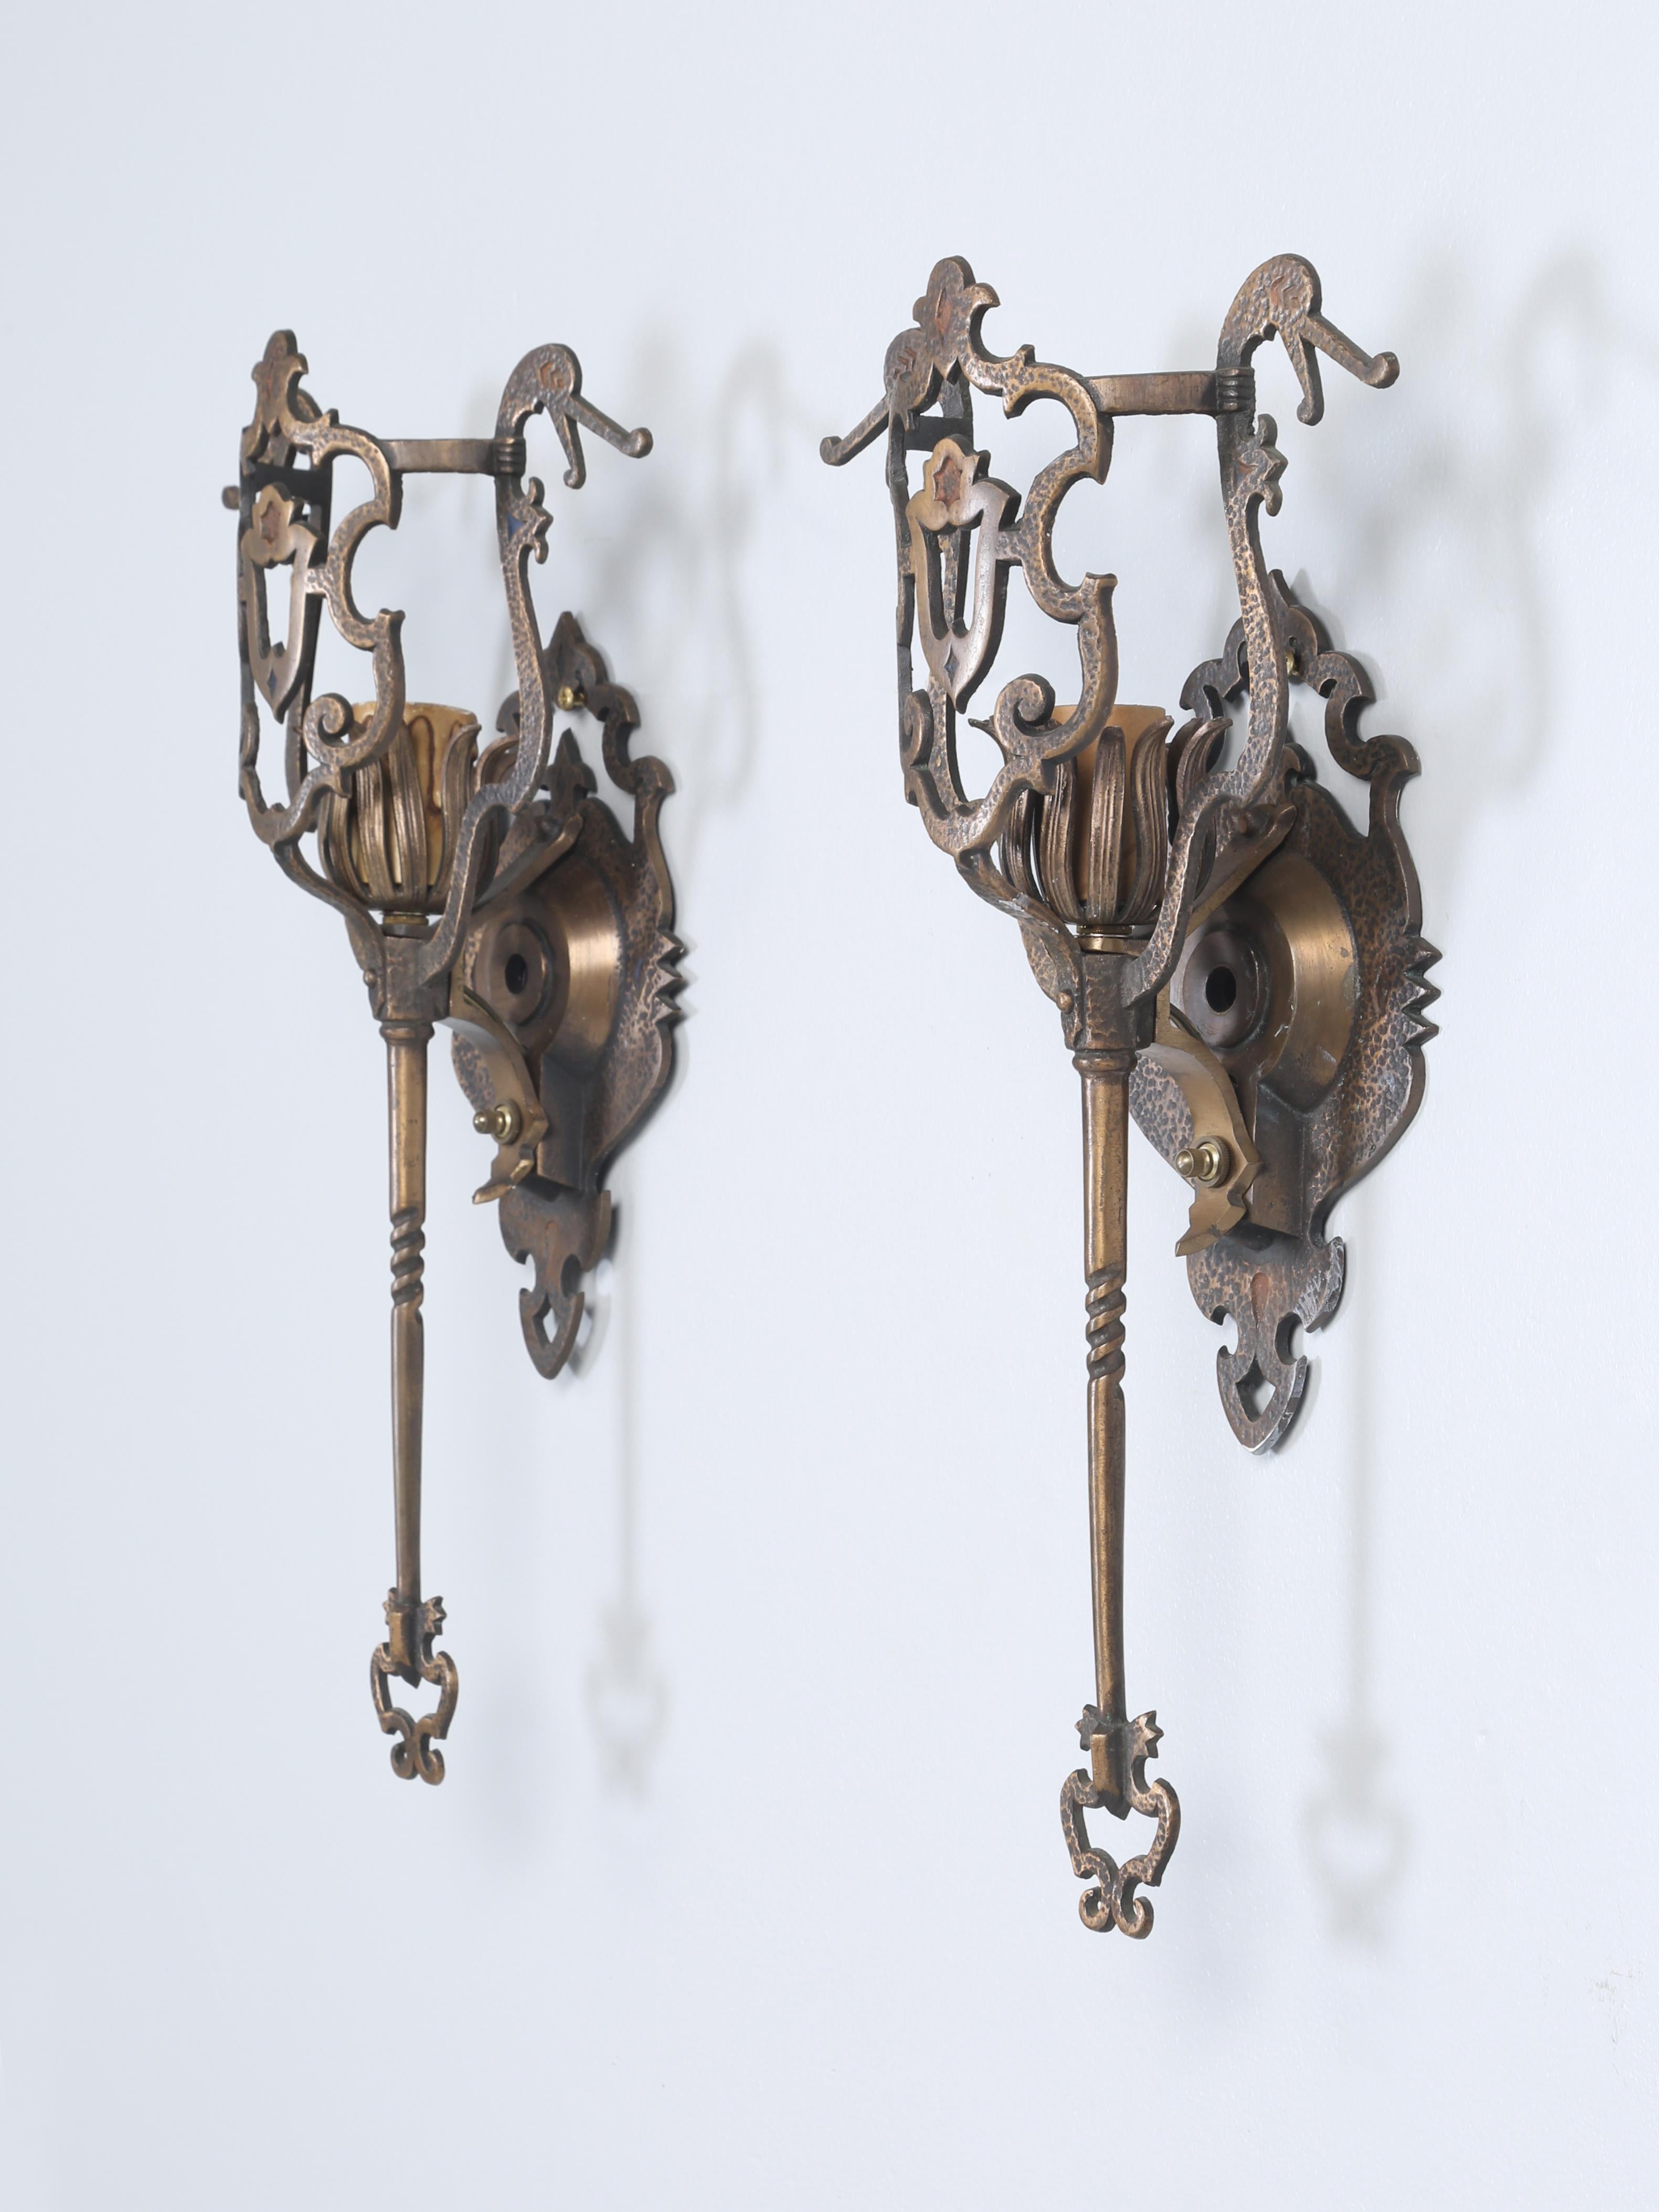 Pair of hand-made very unusual solid brass sconces that were removed from The John Rogerson Montgomery House, a residence designed by famous local architect Howard Van Doren Shaw. It is considered to be a significant example of Georgian Revival